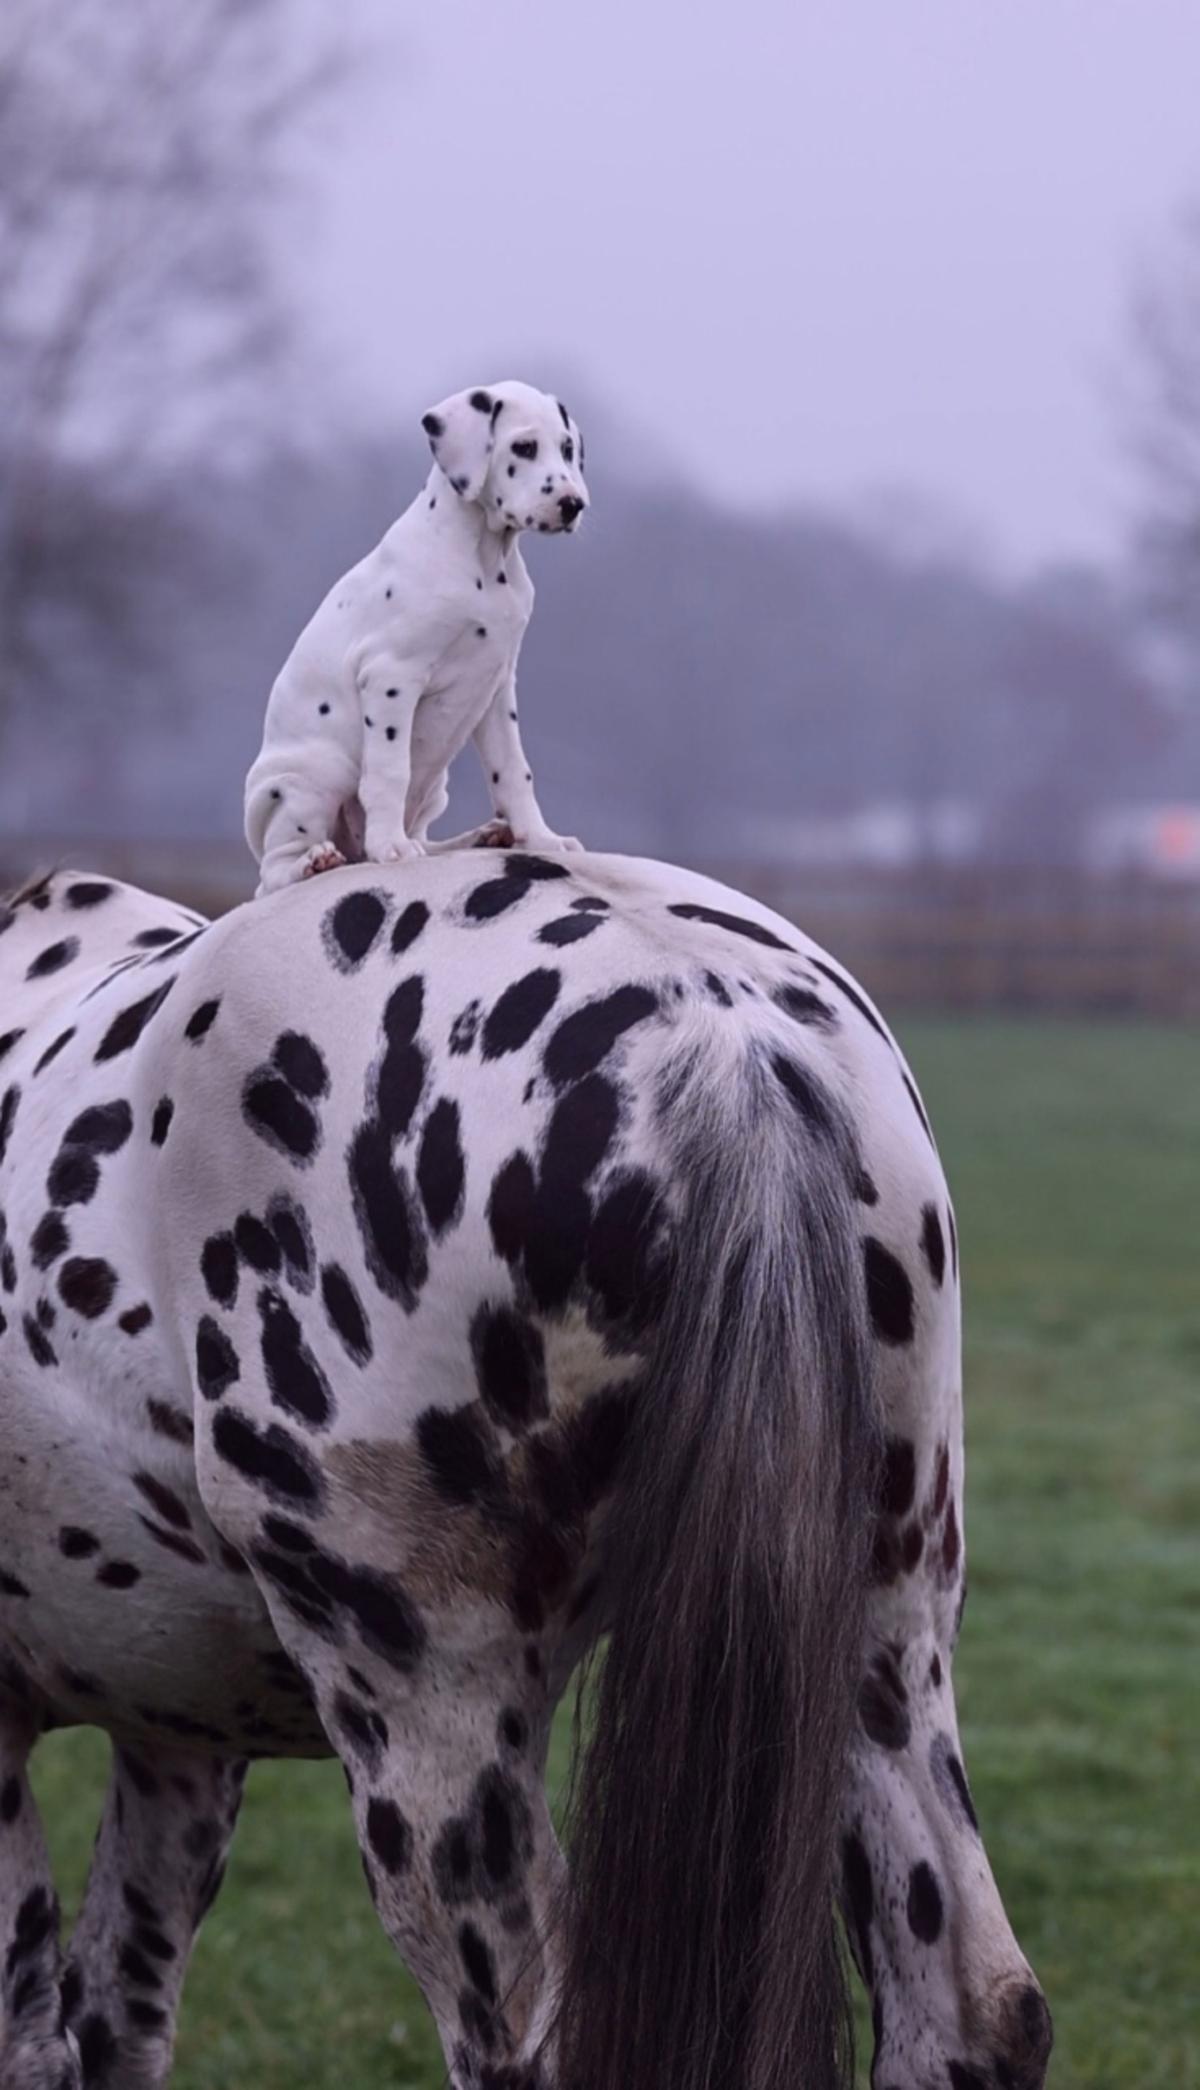 Jack Sparrow the Dalmatian on the back of Nevada. (Courtesy of Caters News)